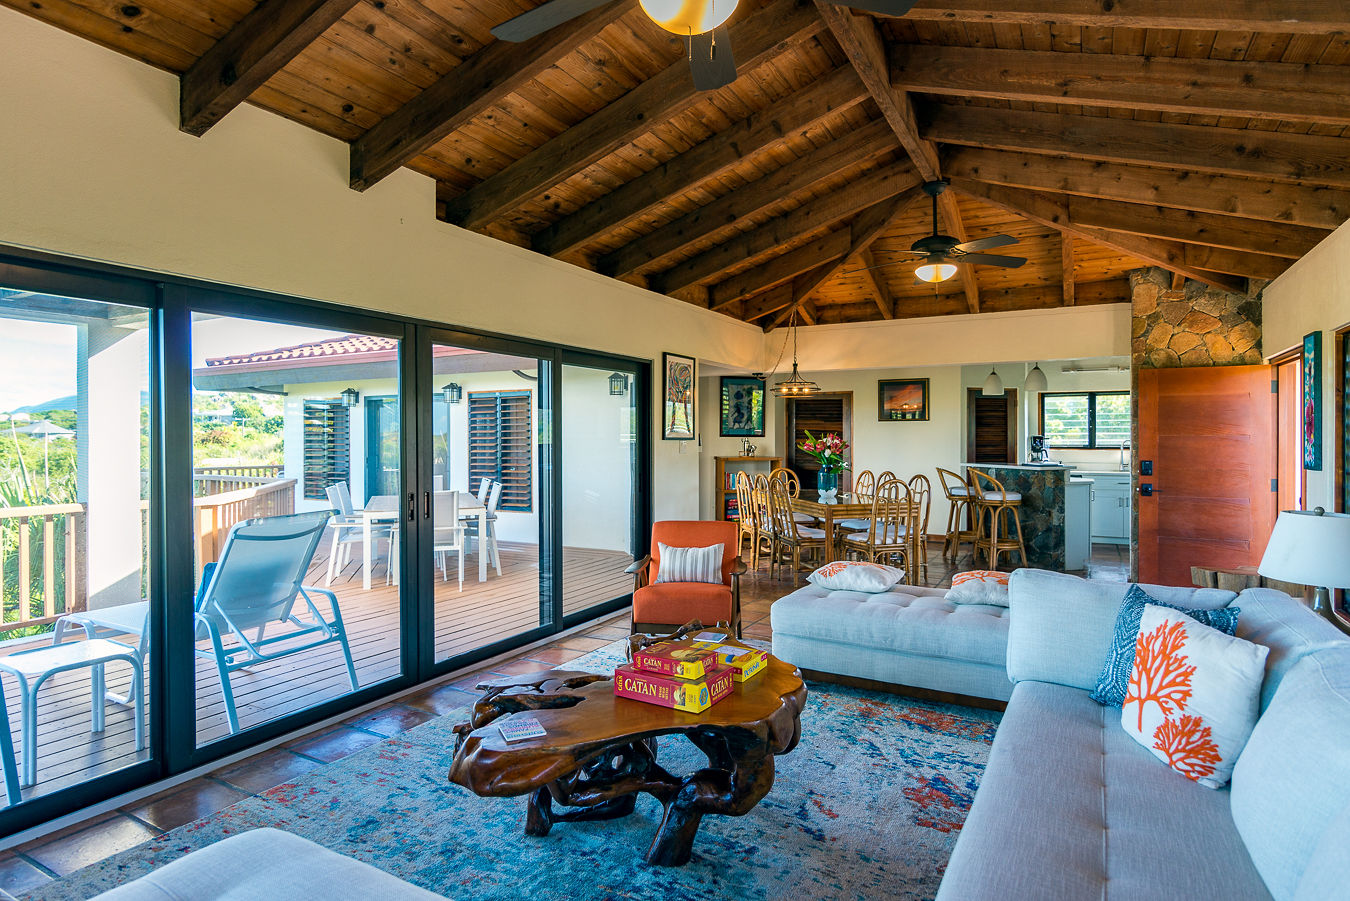 Living area in Amani Villa’s main room with comfortable couches, glass doors to a deck and a dining area in the background.